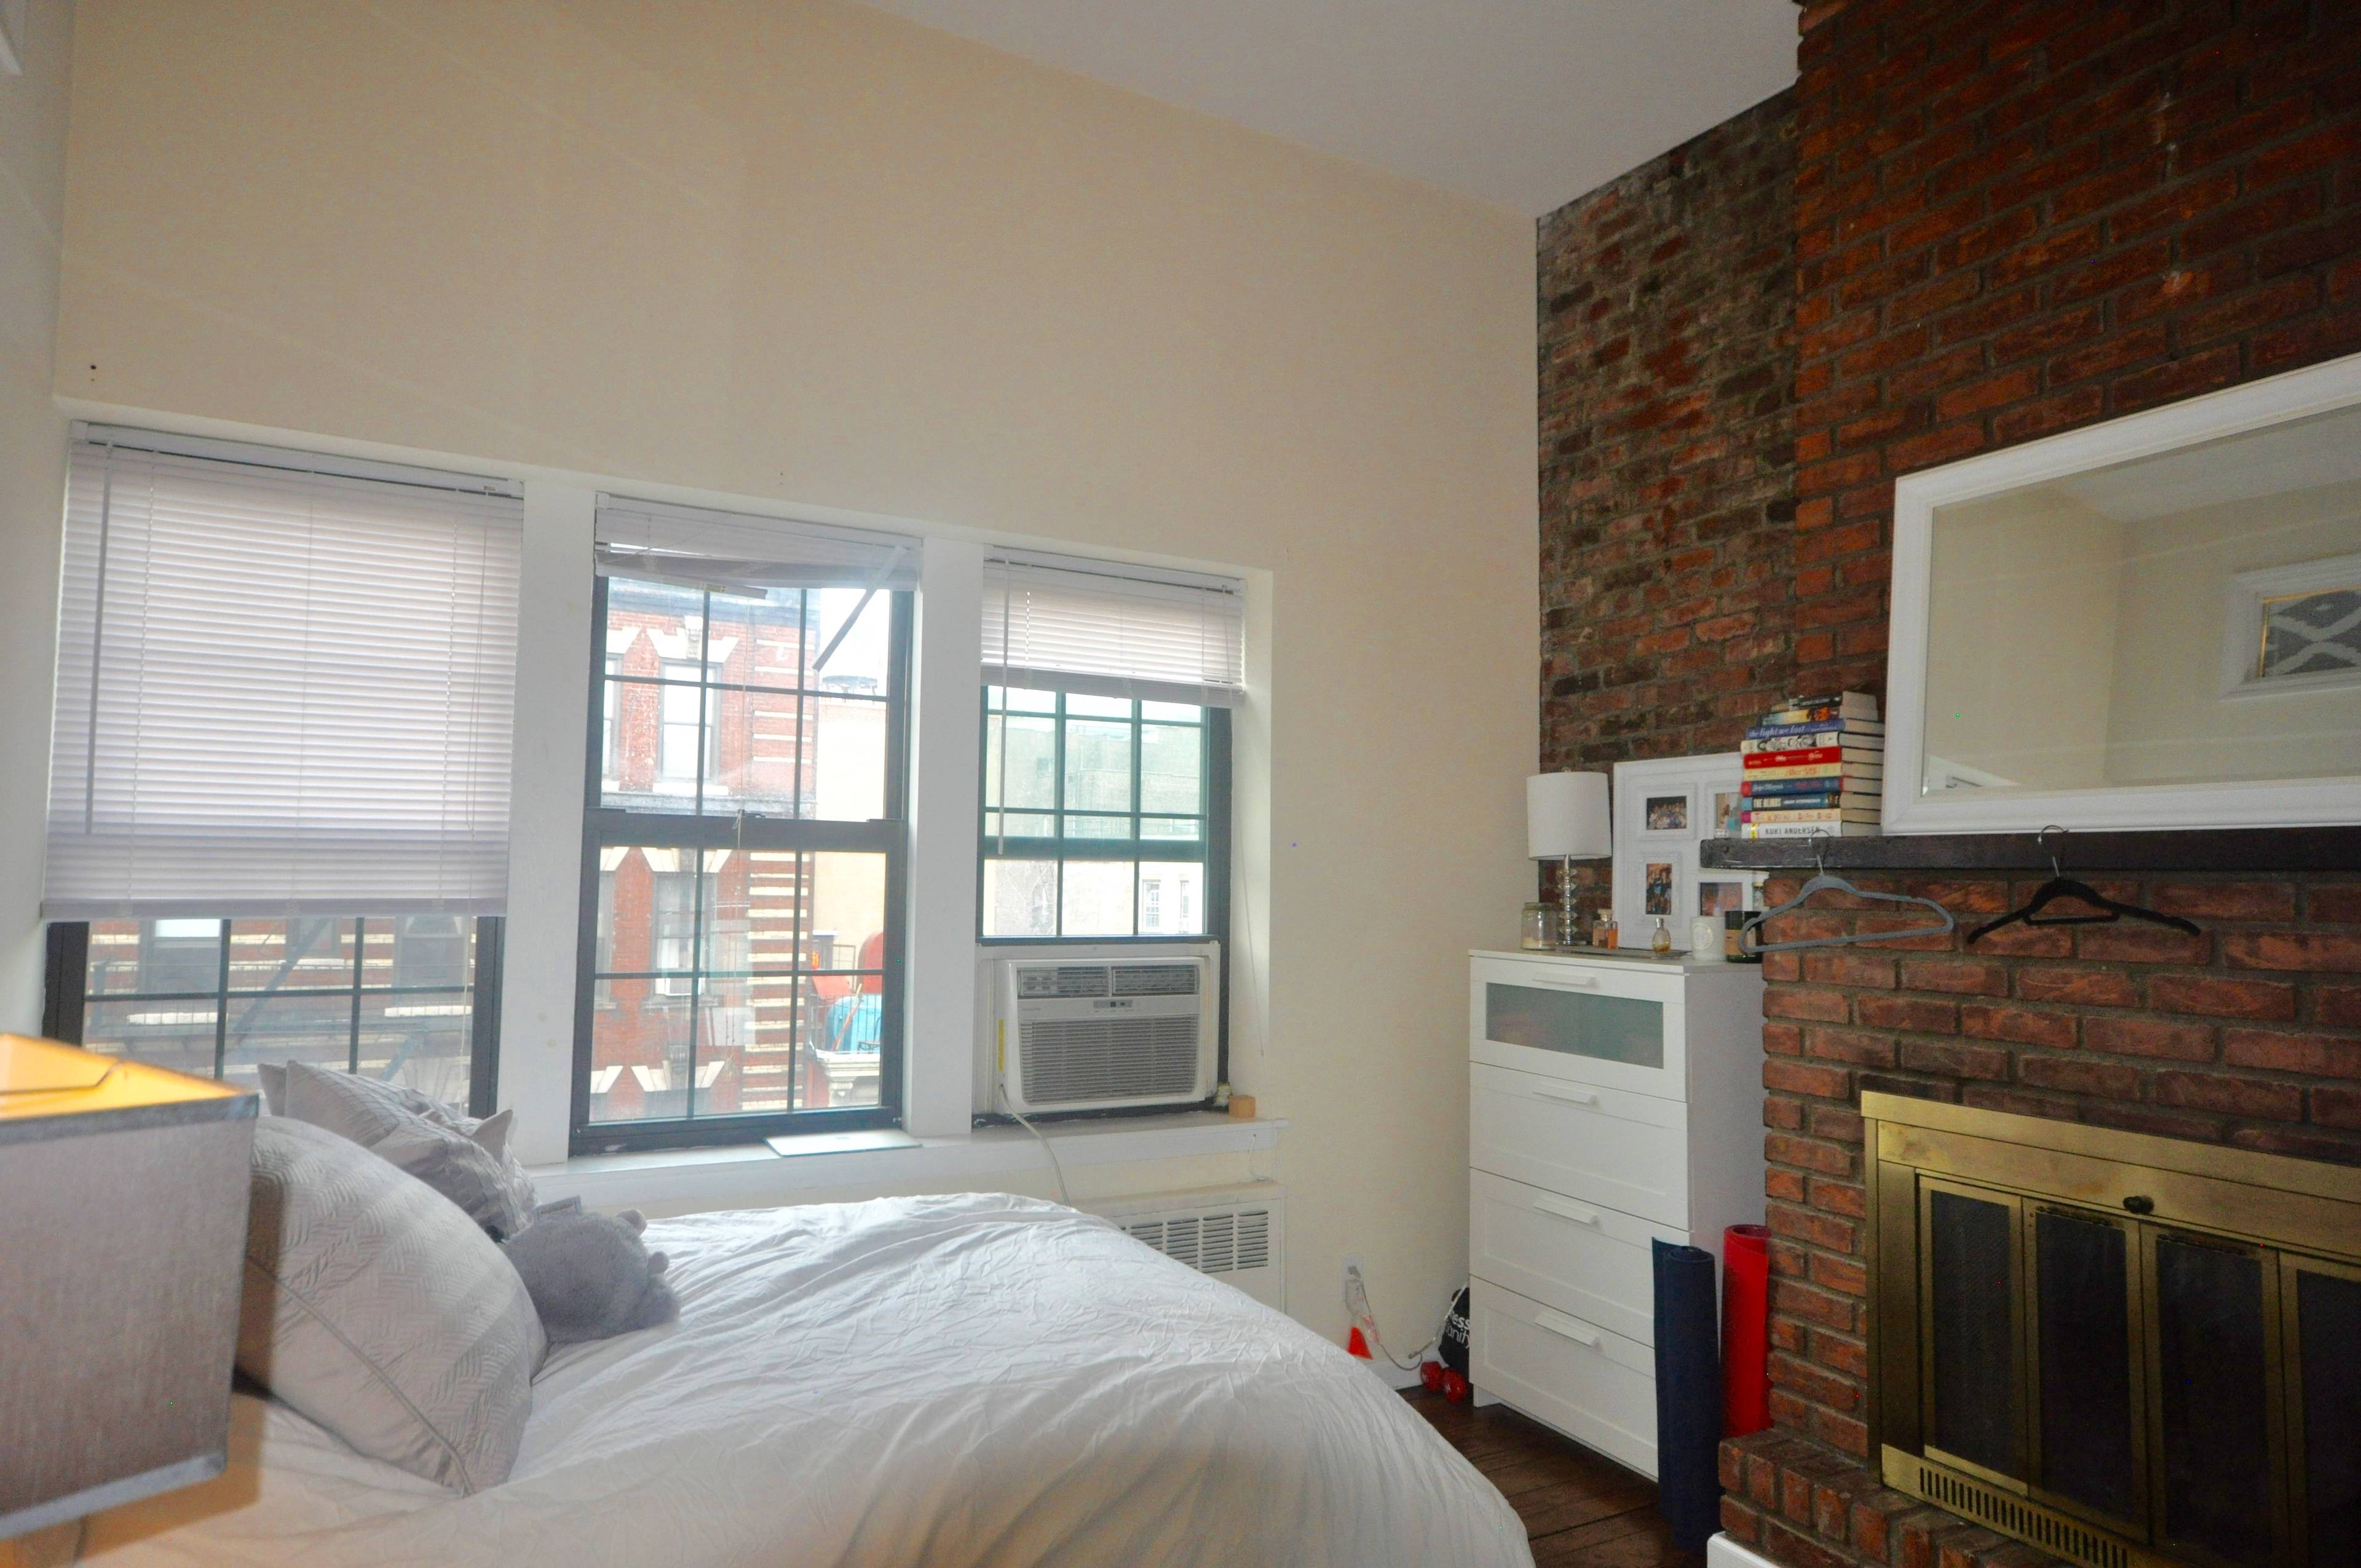 Gut Renovated 4 bedroom 2 bathroom Penthouse Washer Dryer in Unit Prime Greenwich Village Stunning views 12 foot ceilings An abundance of windows allow for plenty of natural light to ...